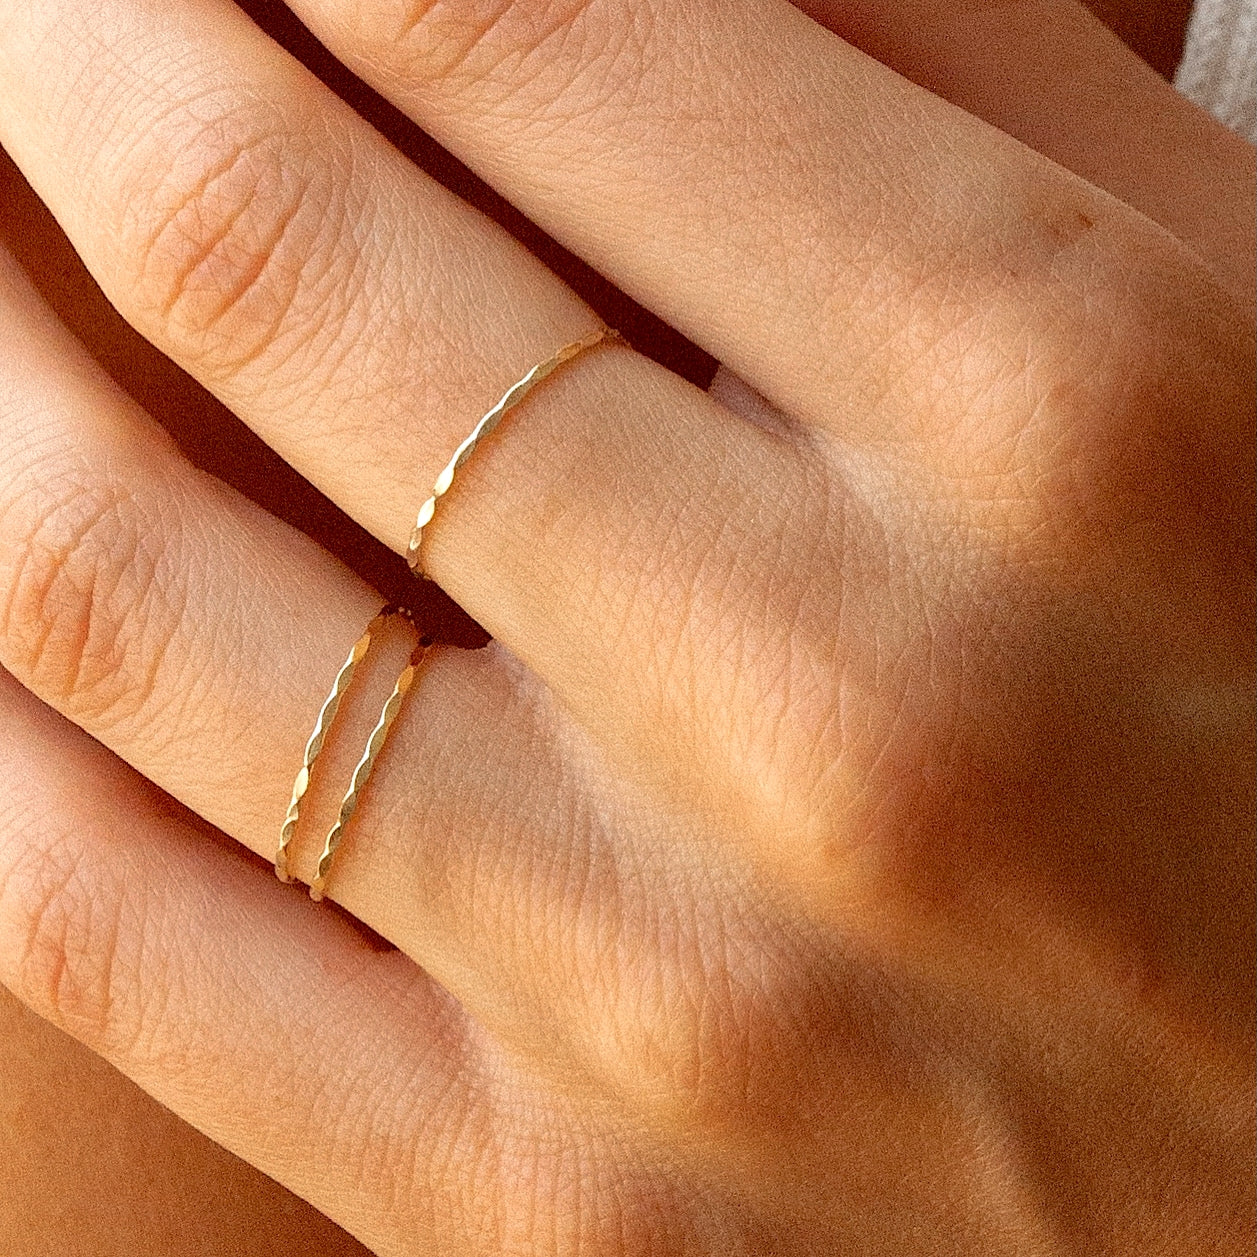 Tiny Solid 14k Gold Hammered Band